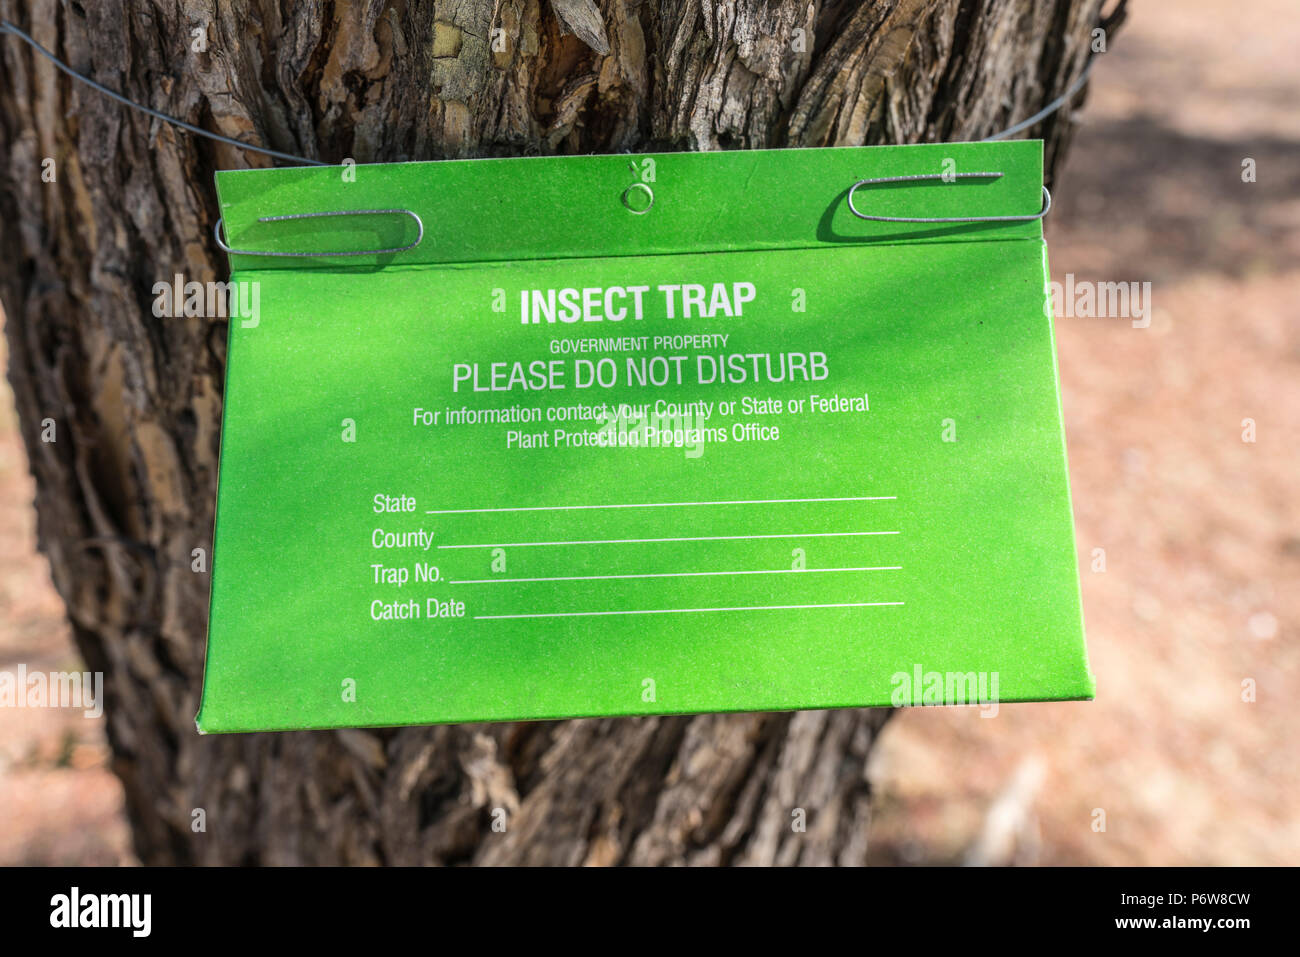 Government agency insect trap hanging on tree. Stock Photo